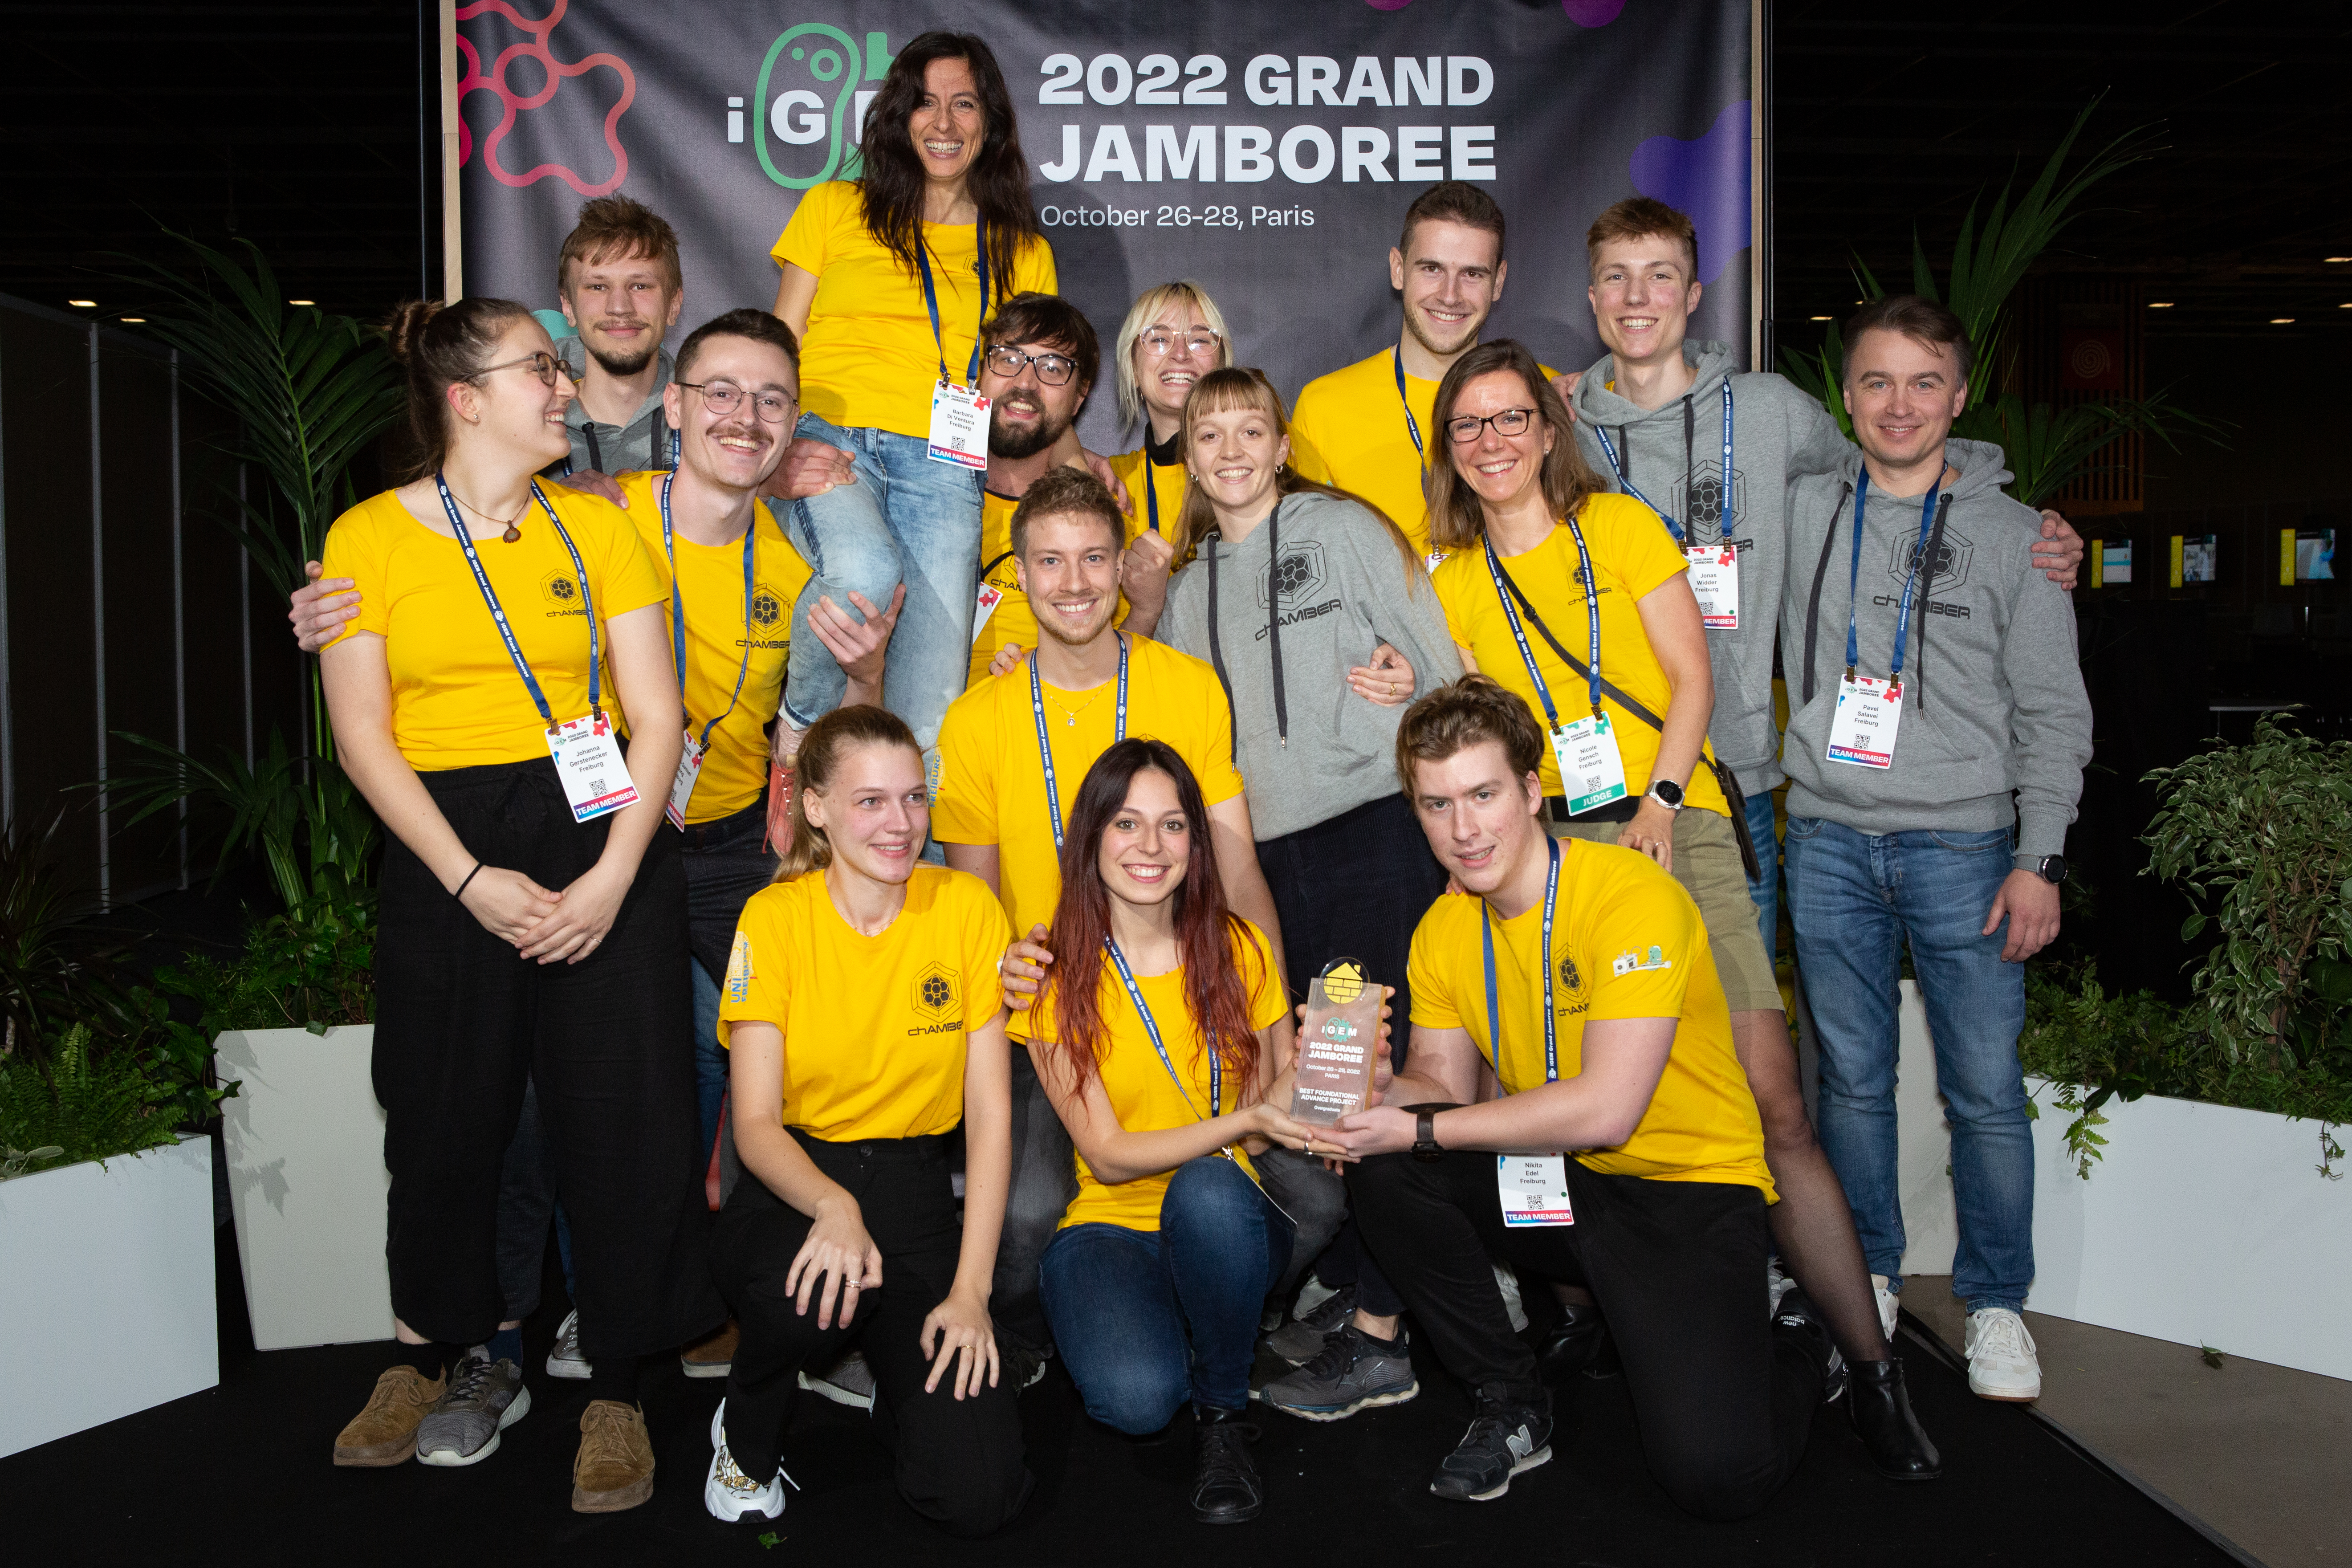 Picture: iGEM Foundation, CC BY 2.0 DEED